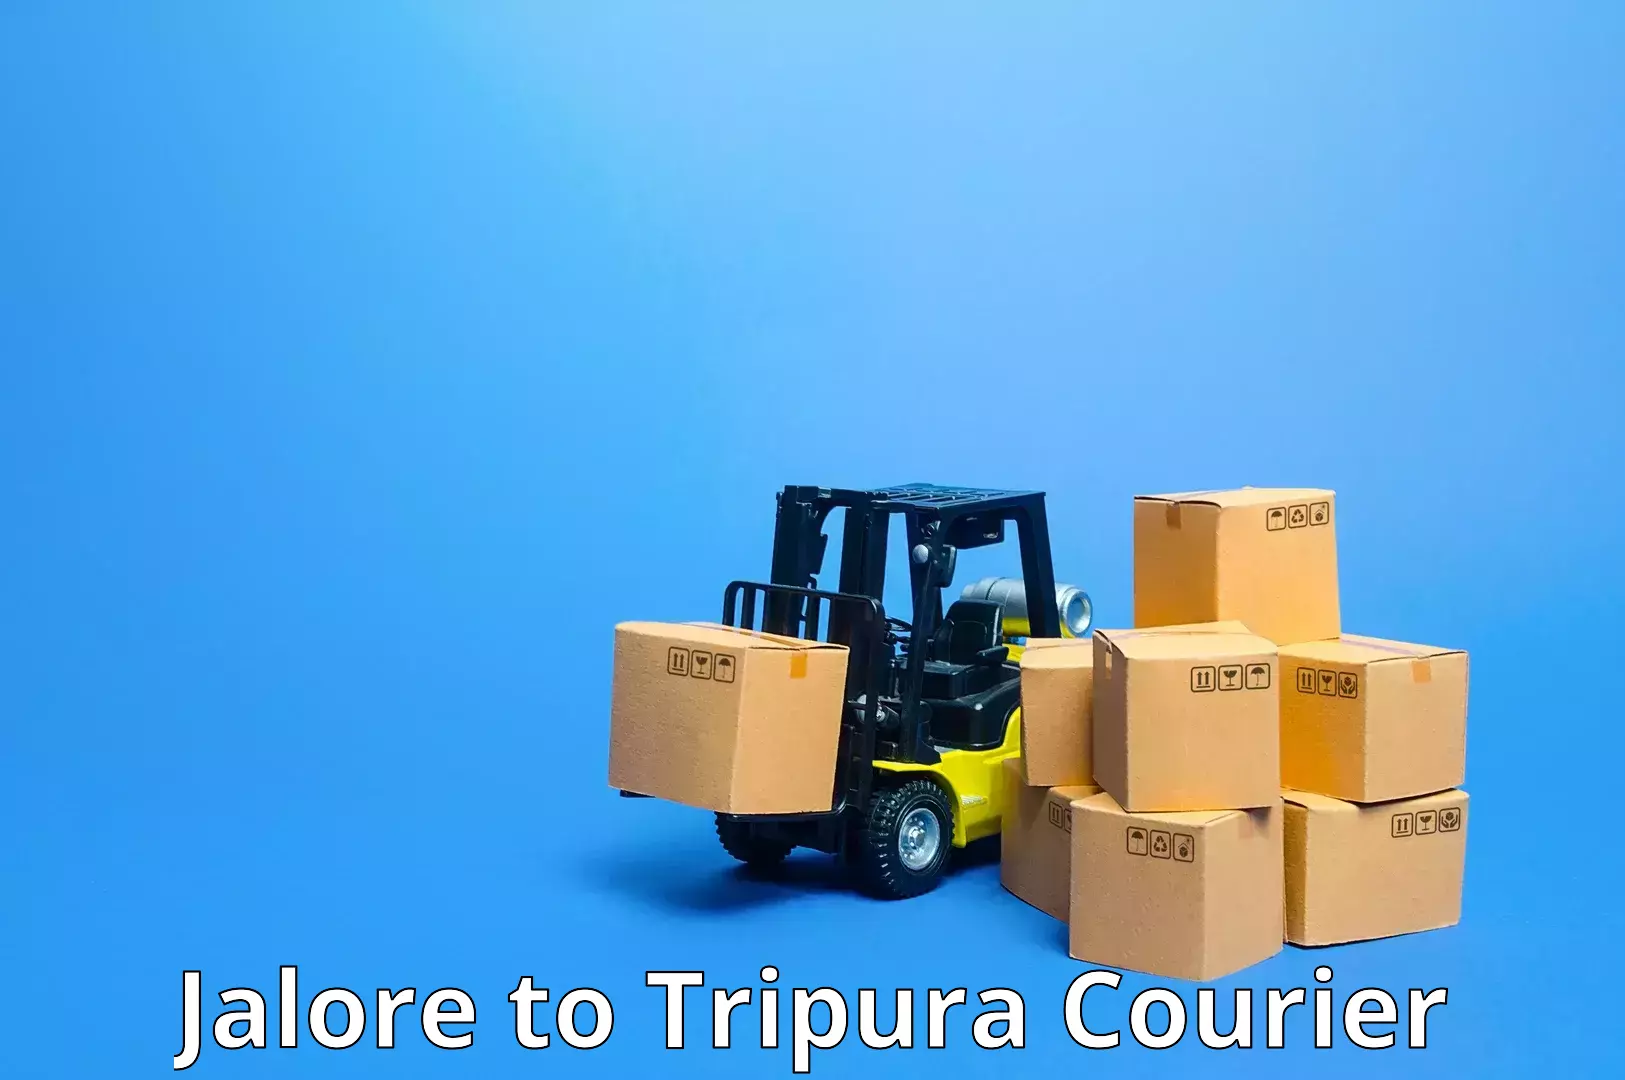 Cash on delivery service Jalore to Udaipur Tripura